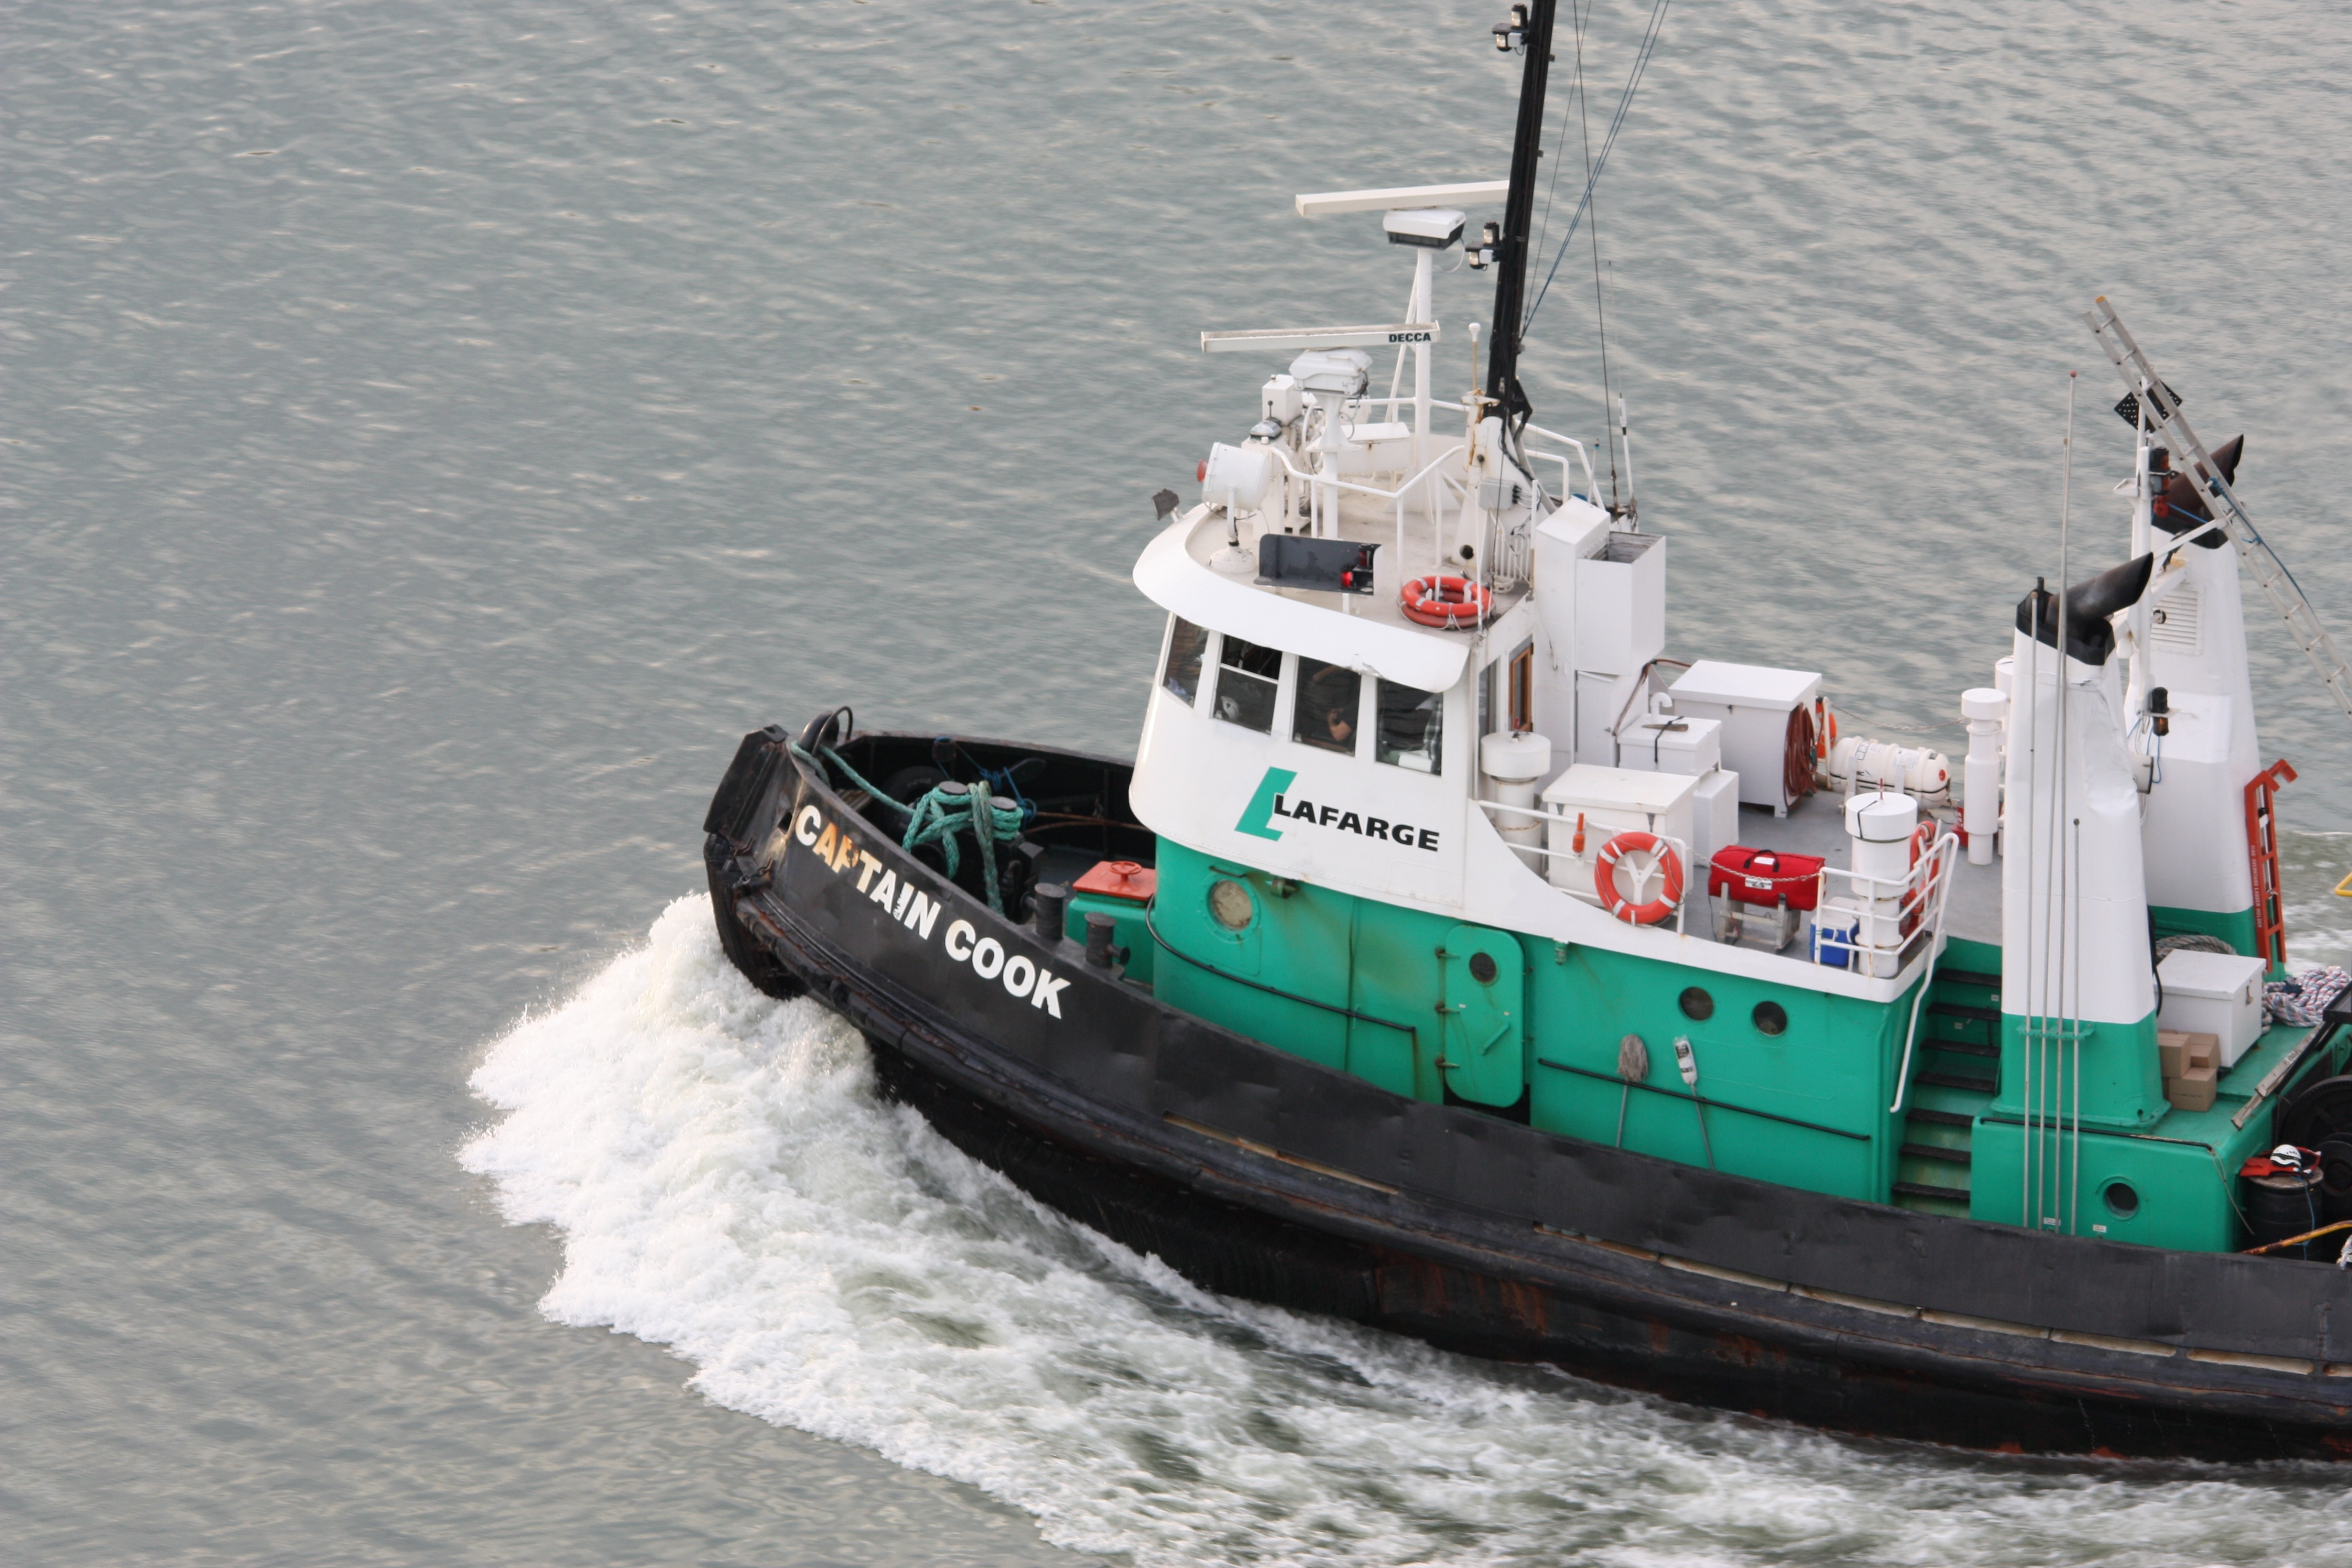 white teal and black captain cook tugboat